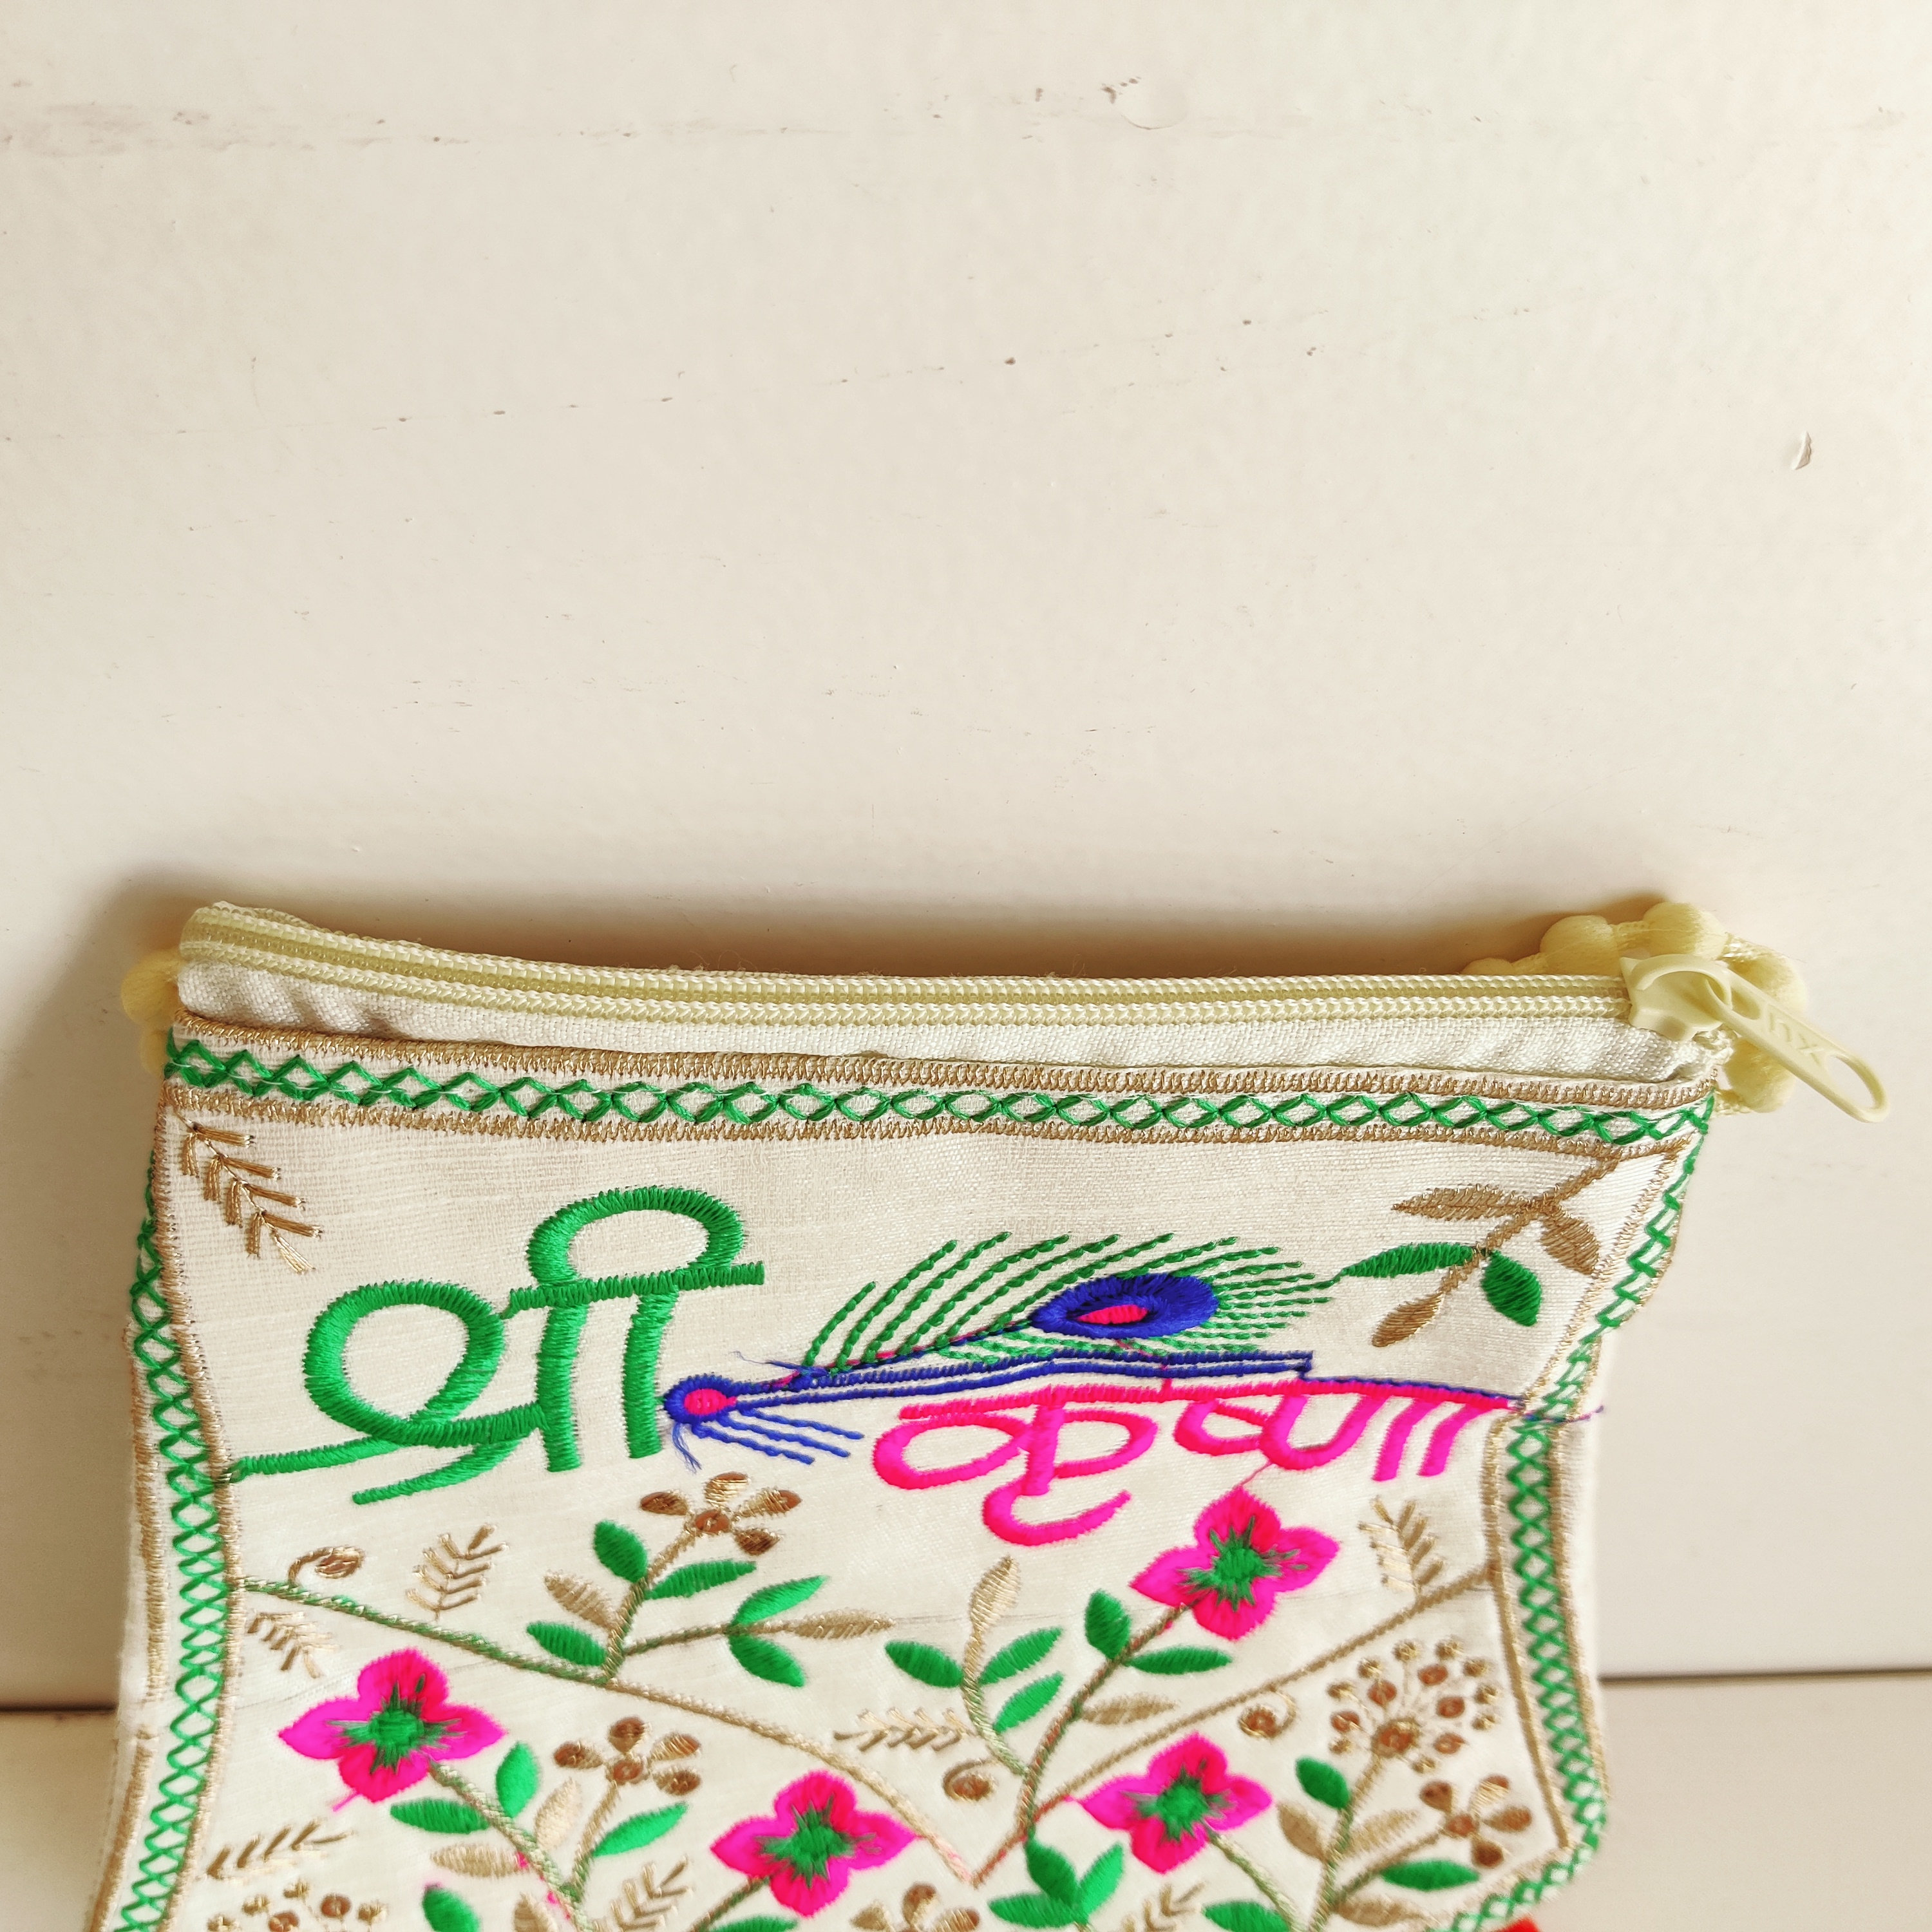 Import embroidered handicrafts from India - Exim SEO - EIG